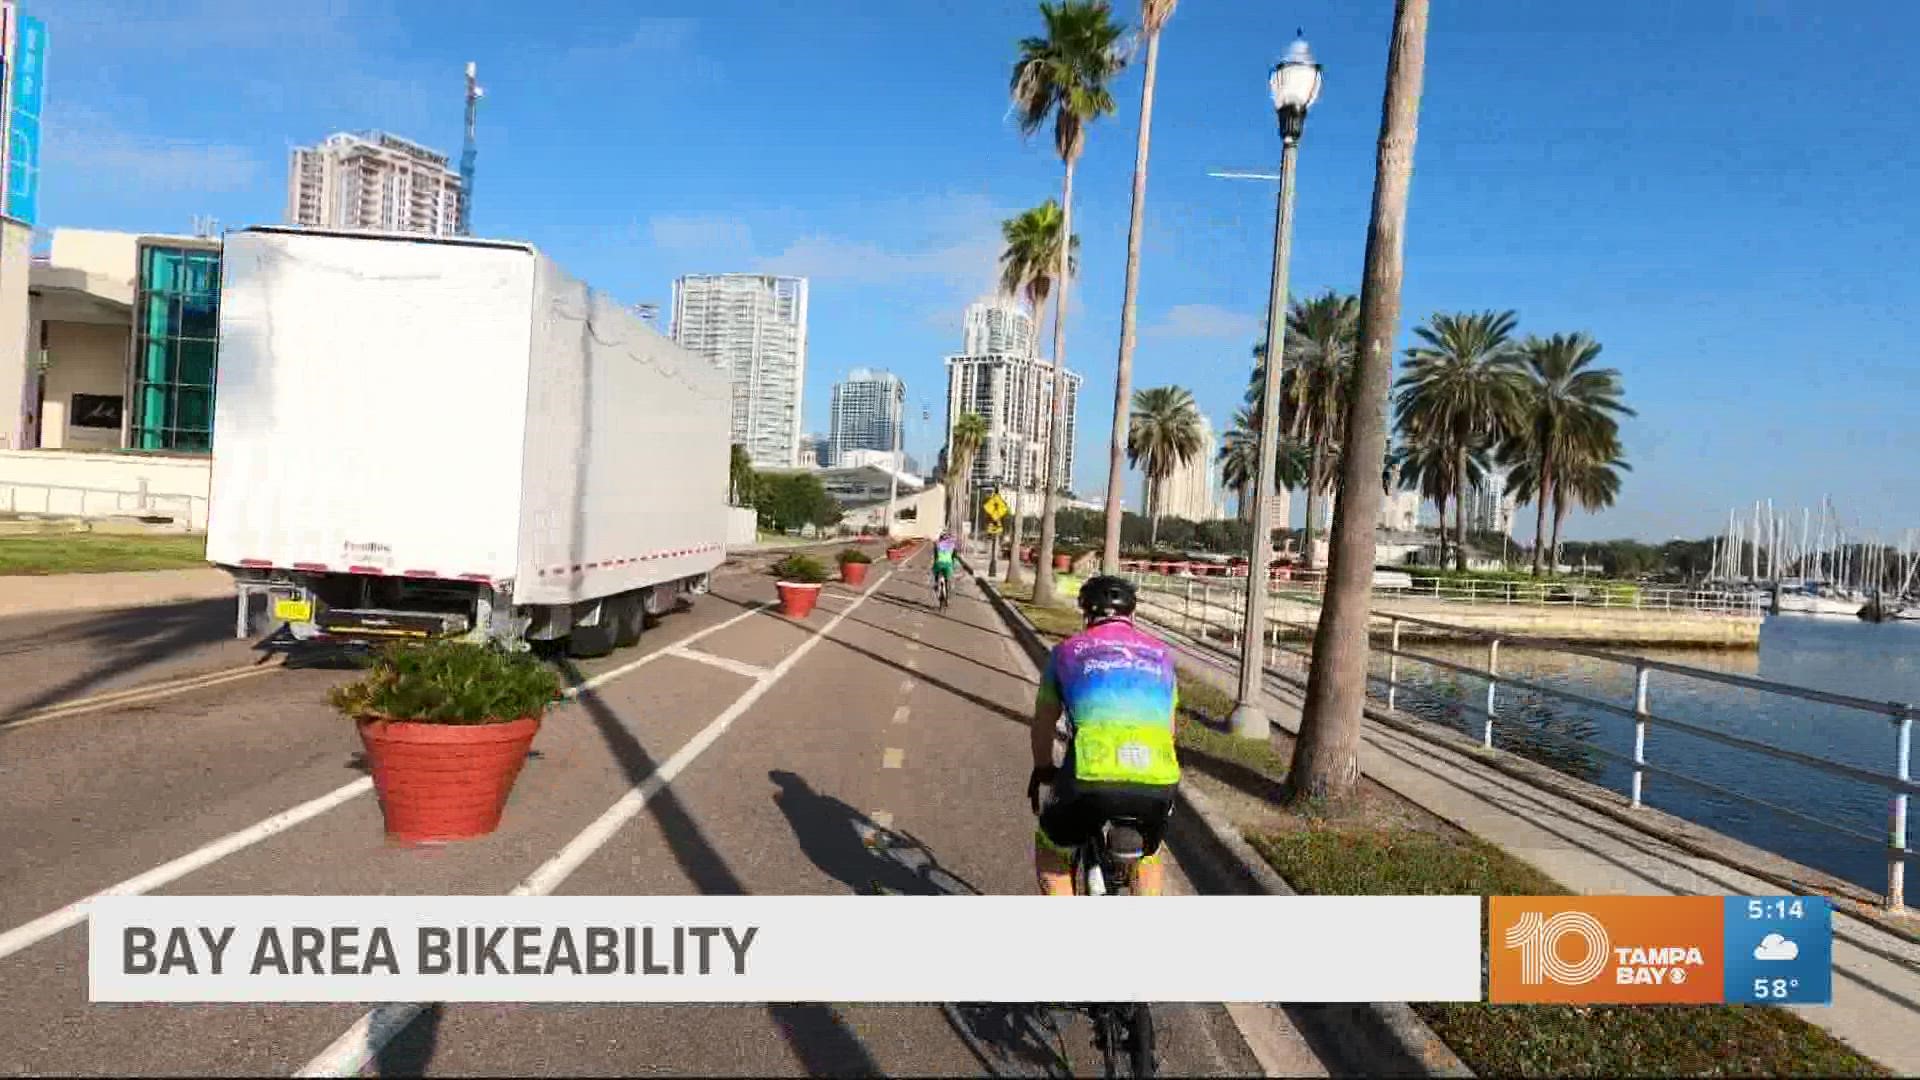 Tampa has recently installed more barrier-protected bike lanes.